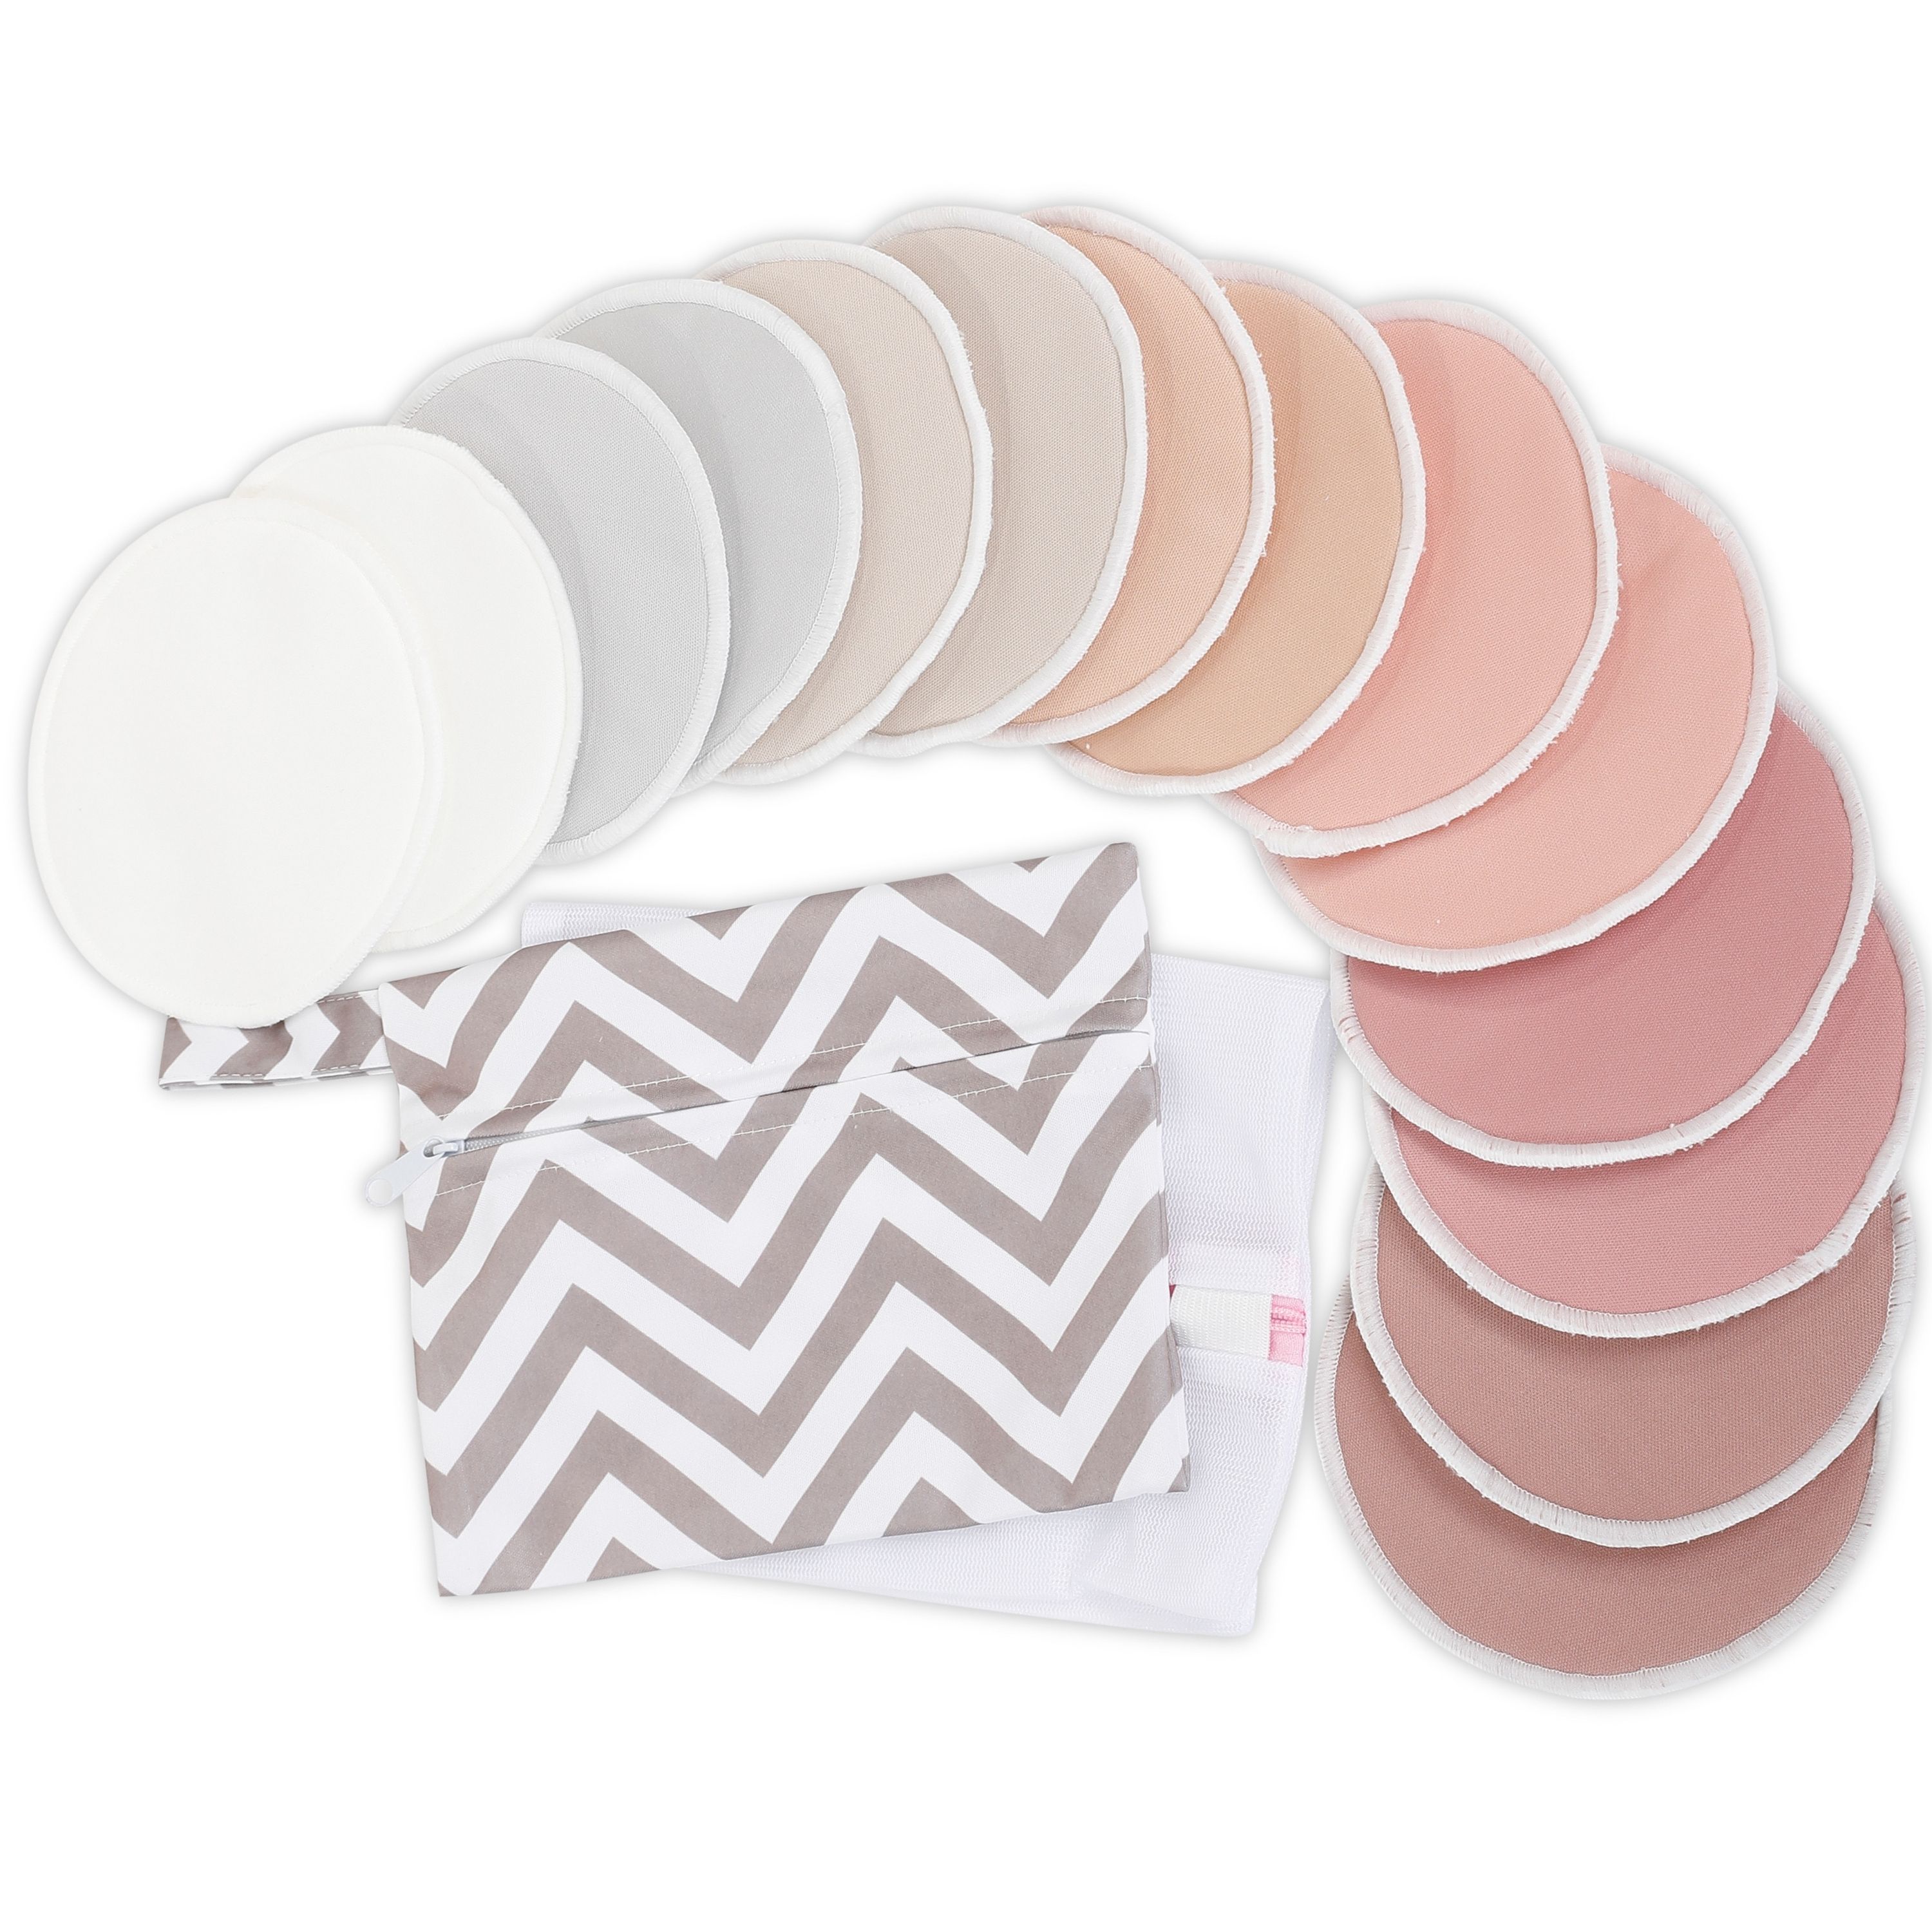 Softies Contoured Reusable Nursing Pads, Absorbent Breast Pads for  Breastfeeding Women & Moms, Machine Washable Nipple Pads w/ 3 Layers of  Milk Leak